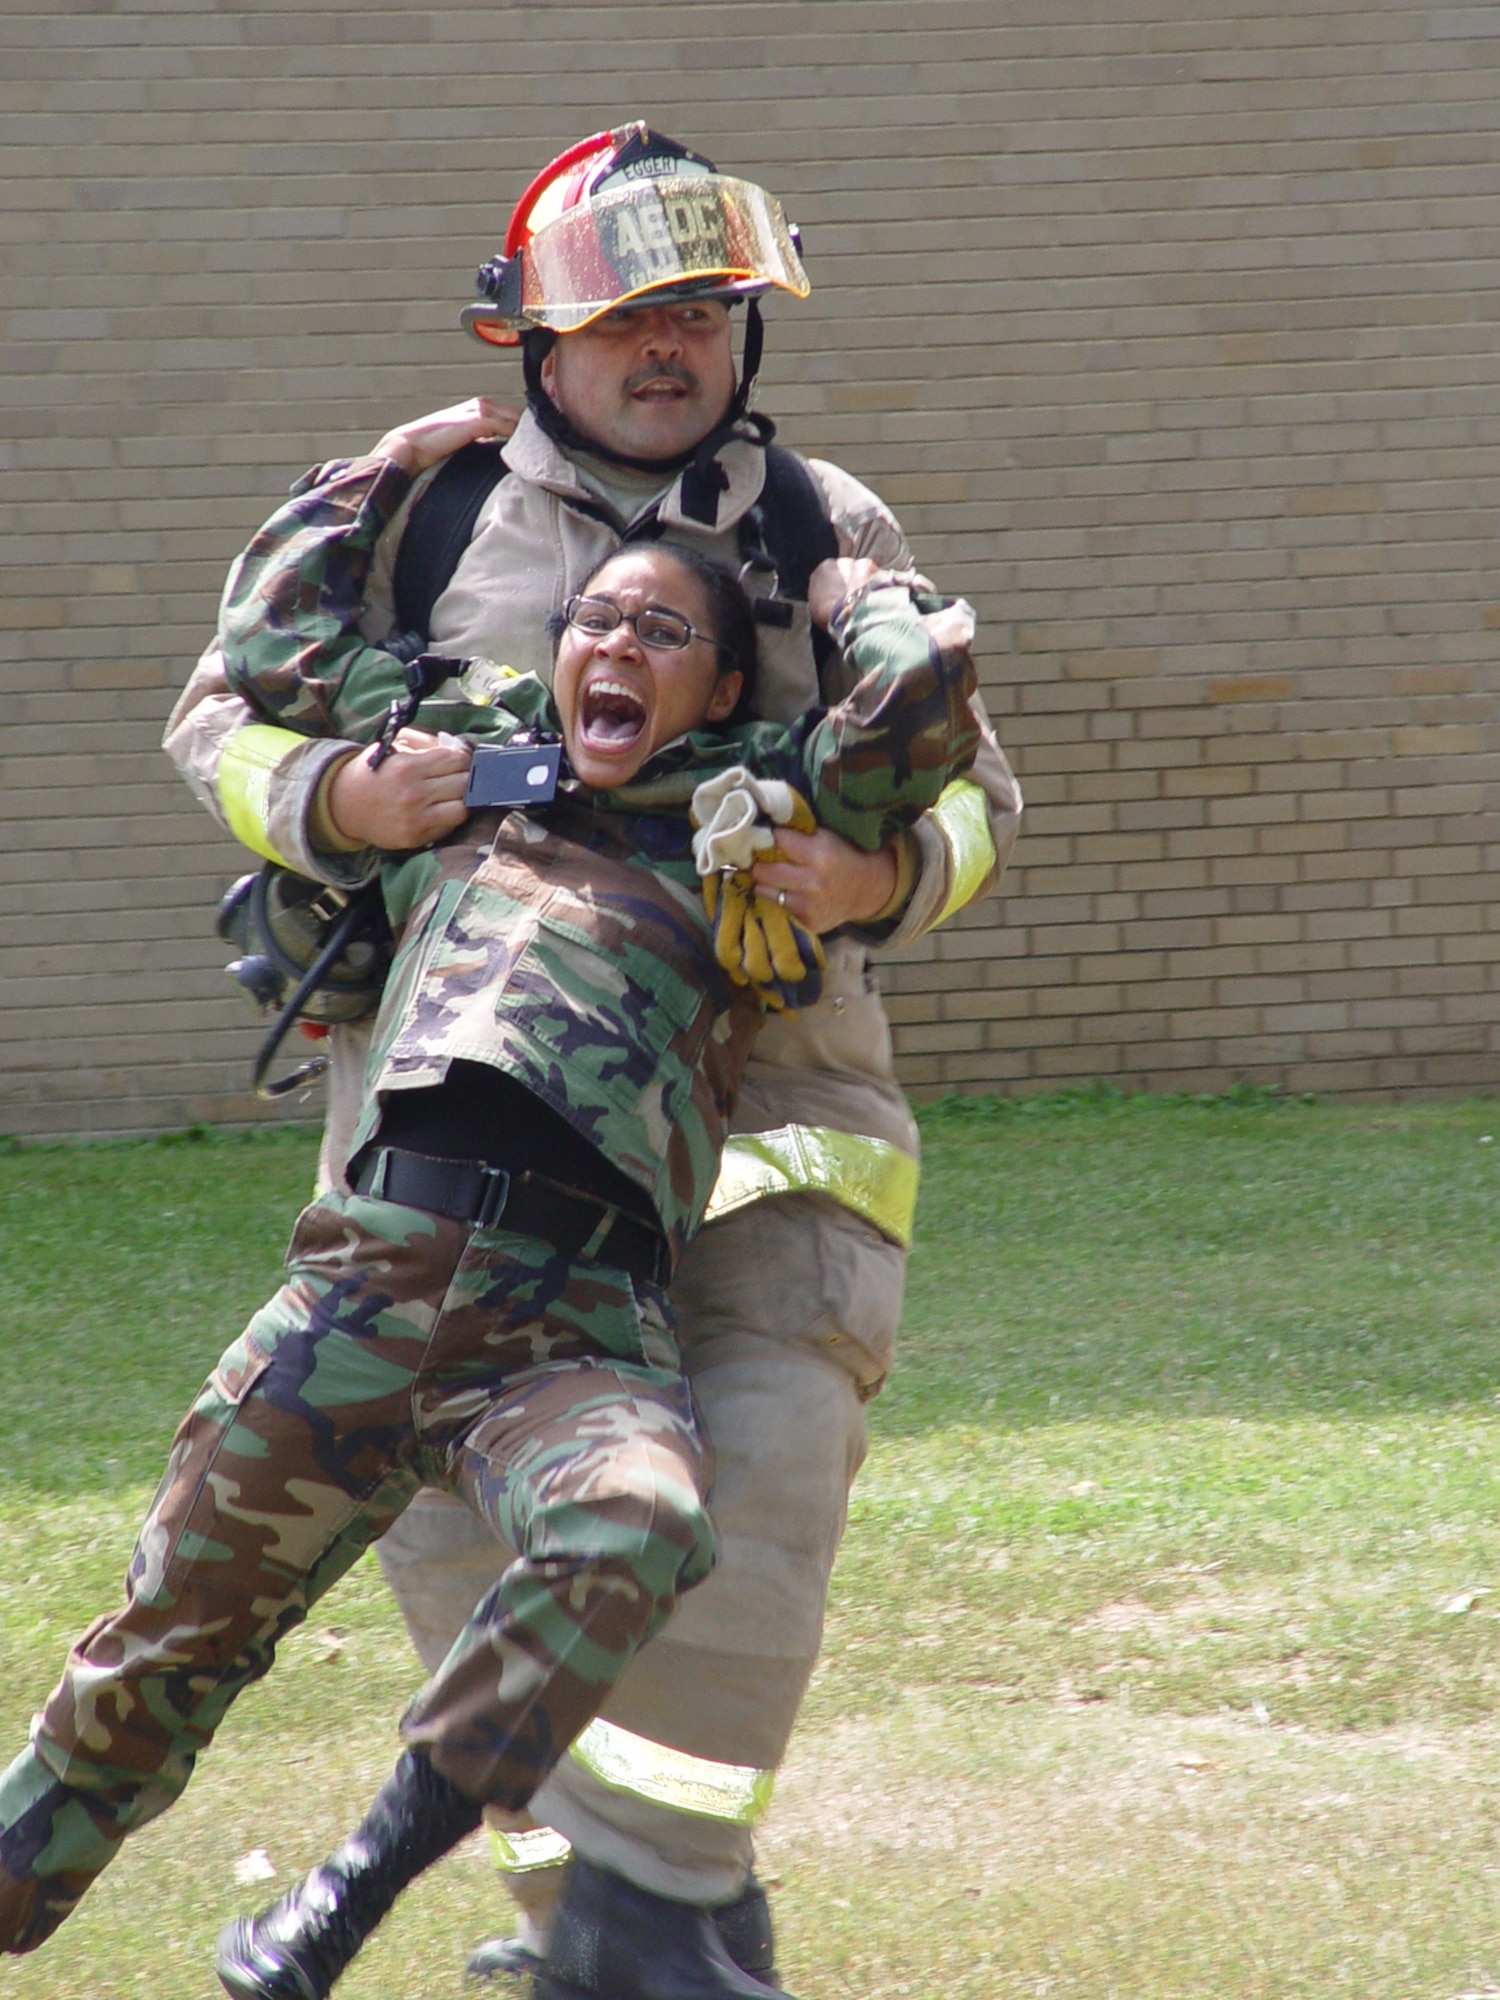 AEDC firefighter and crew chief Dennis Eggert had his hands full as he assisted Tech.
Sgt. Naomi Bullock, who portrayed a panicked ‘survivor’ of a simulated terrorist attack during an emergency response drill Sept. 15, 2006. The training exercise was held in response to a simulated scenario in which a small plane carrying explosives was fl own into the center’s headquarters building. (photo by Philip Lorenz III)